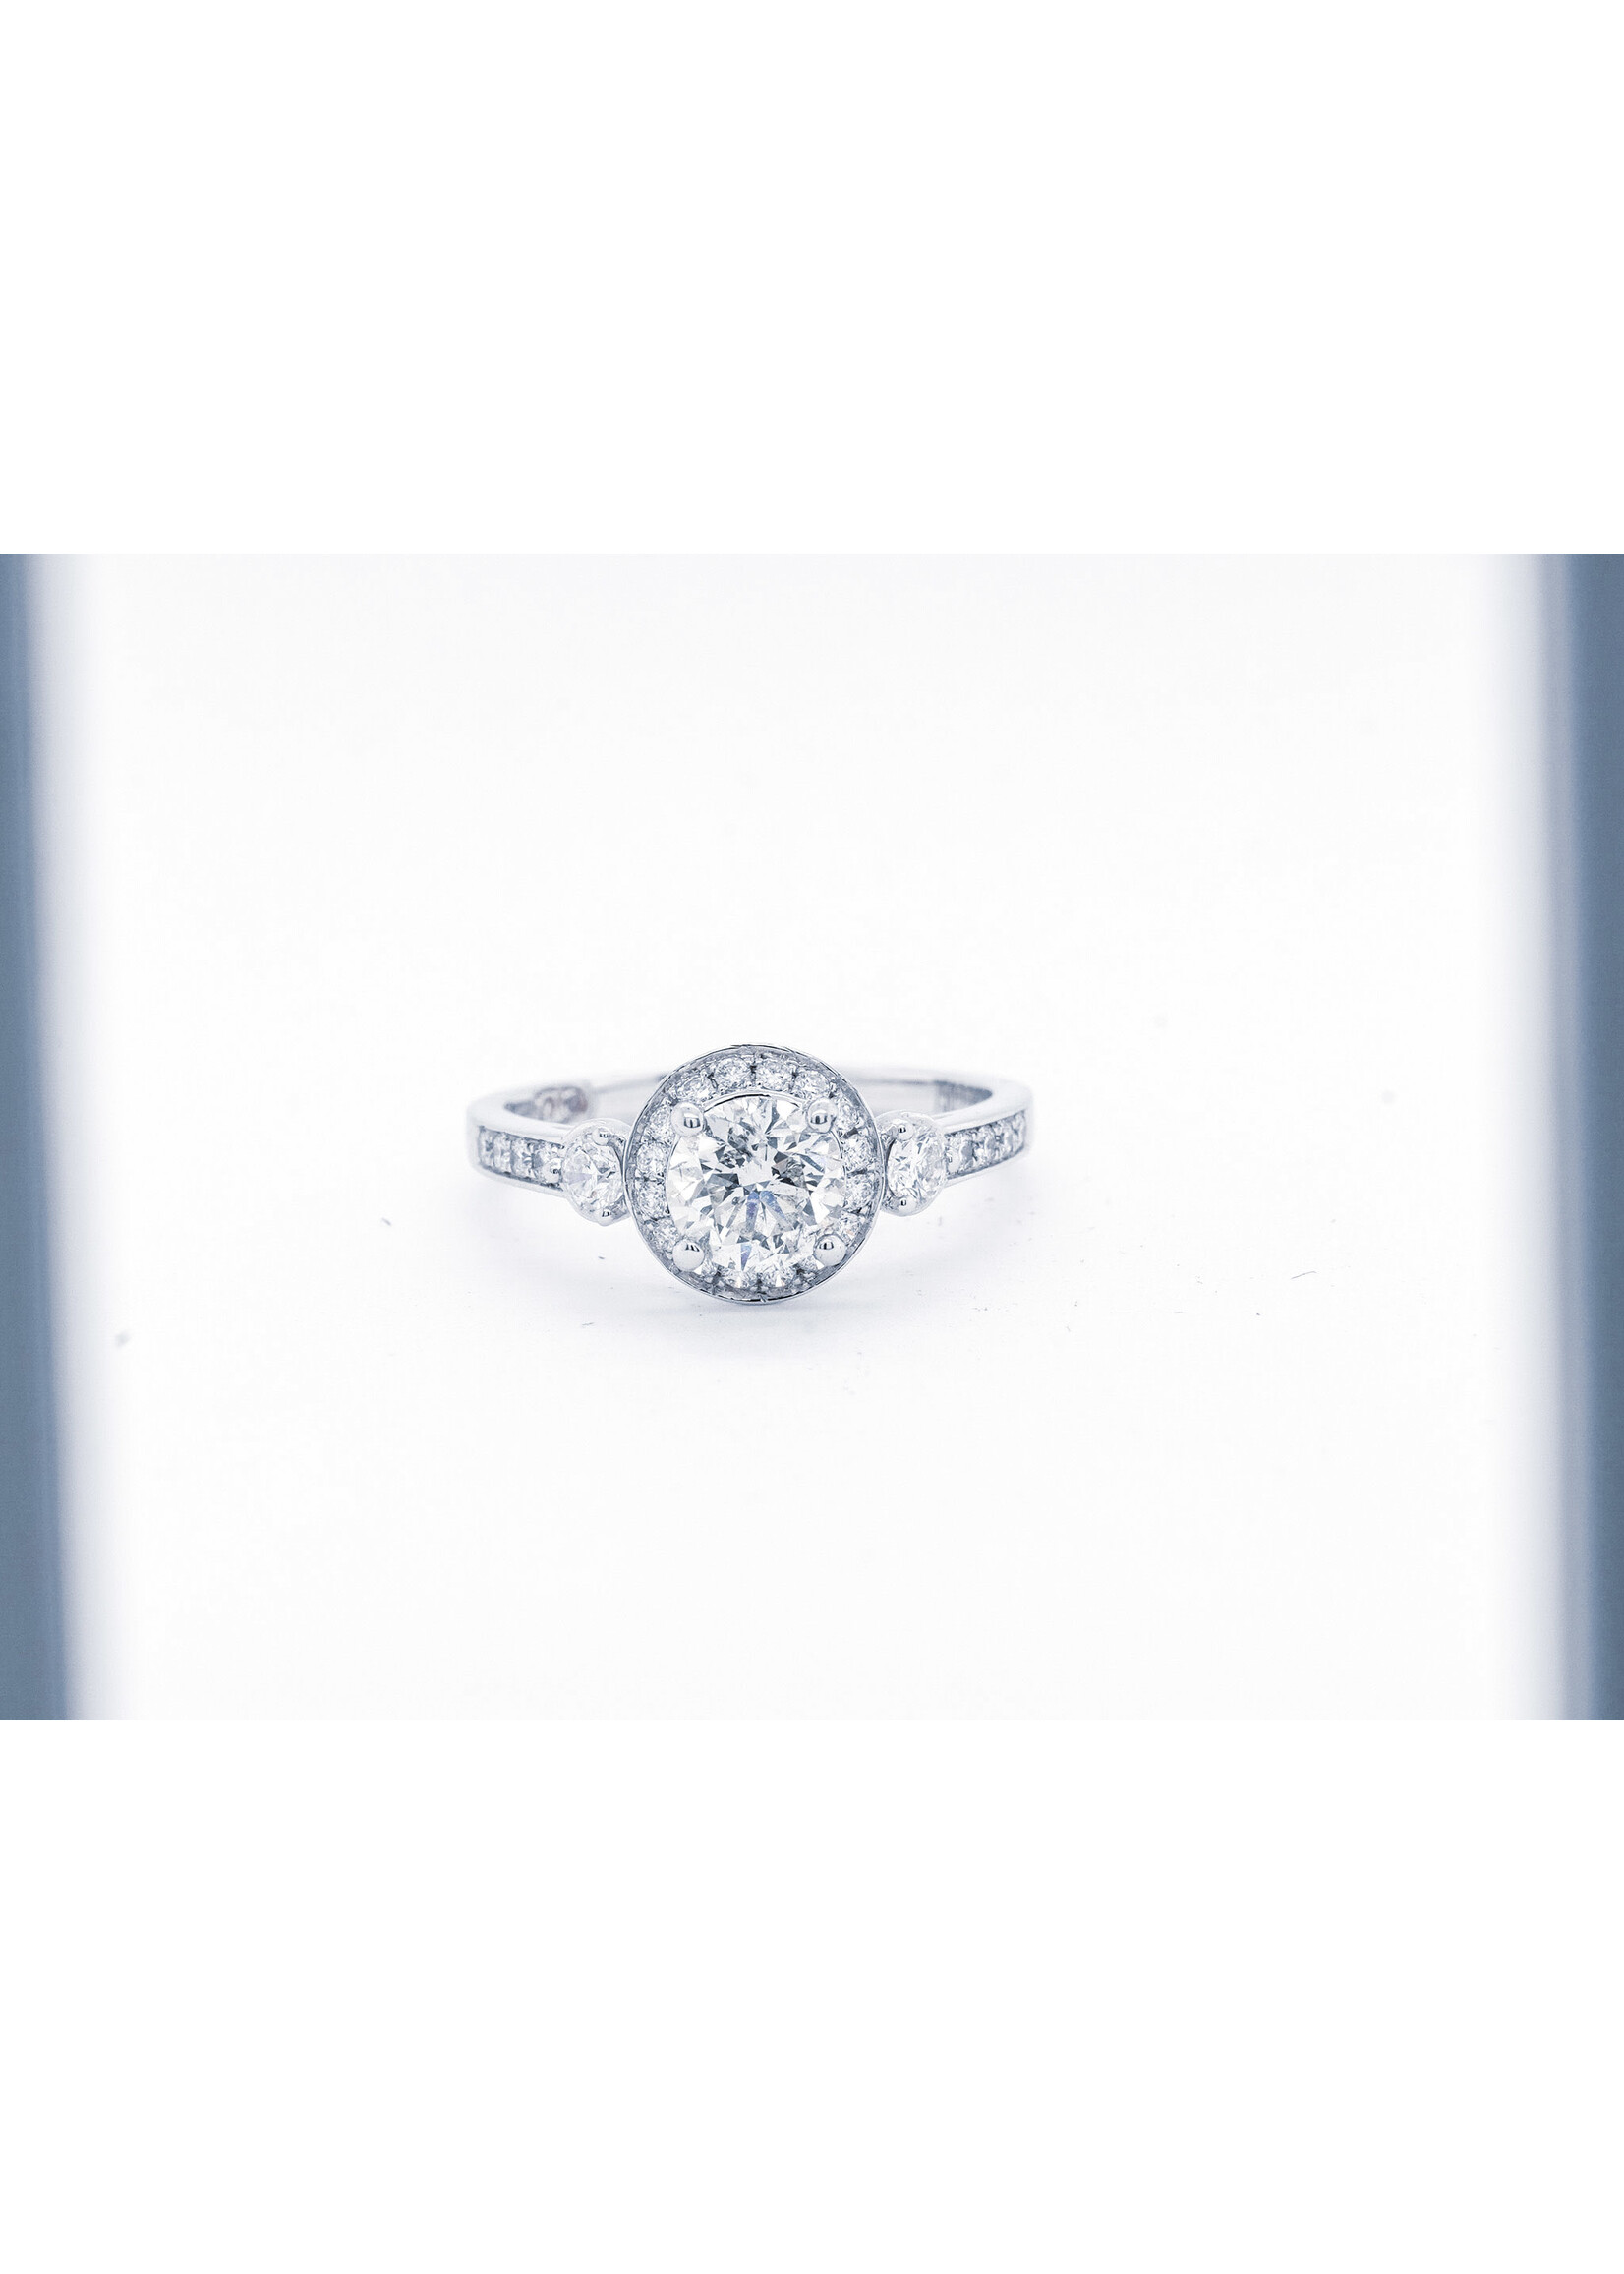 18KW 3.33g 1.31TW (.91ctr) H/SI1 Round Diamond Demarco Halo Engagement Ring (size 6.5)